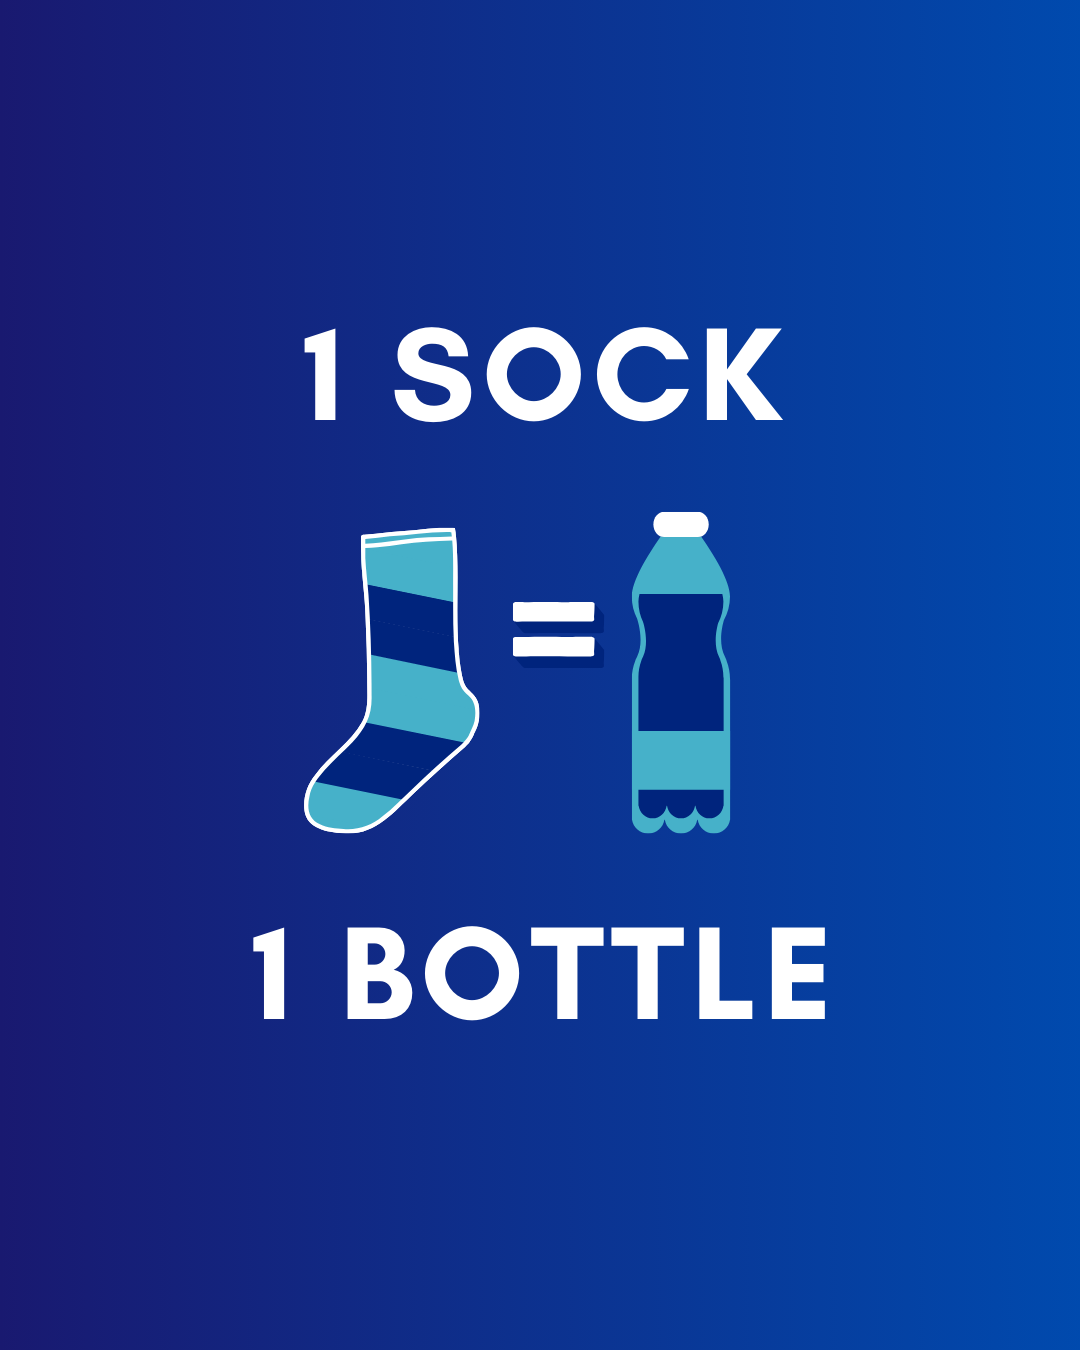 Sustainable socks made from recycled plastic bottles